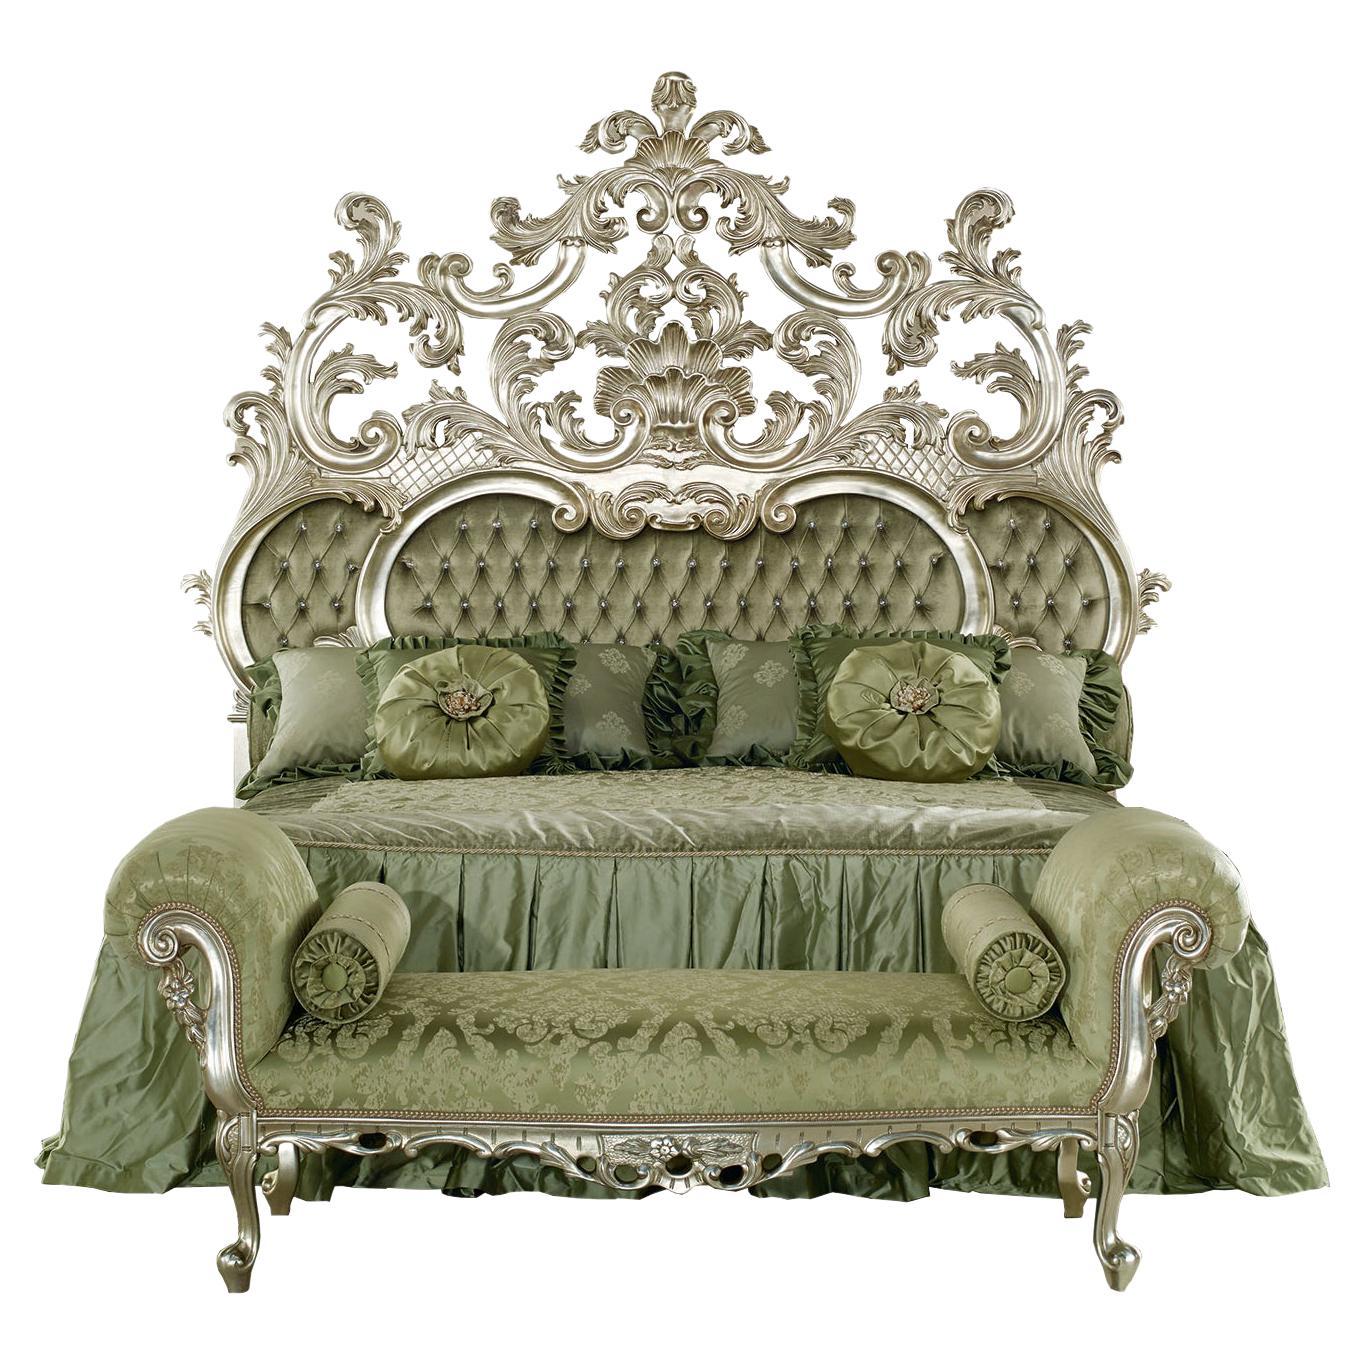 21st Century Green Double Bed by Modenese Gastone, Interiors Baroque Inspiration